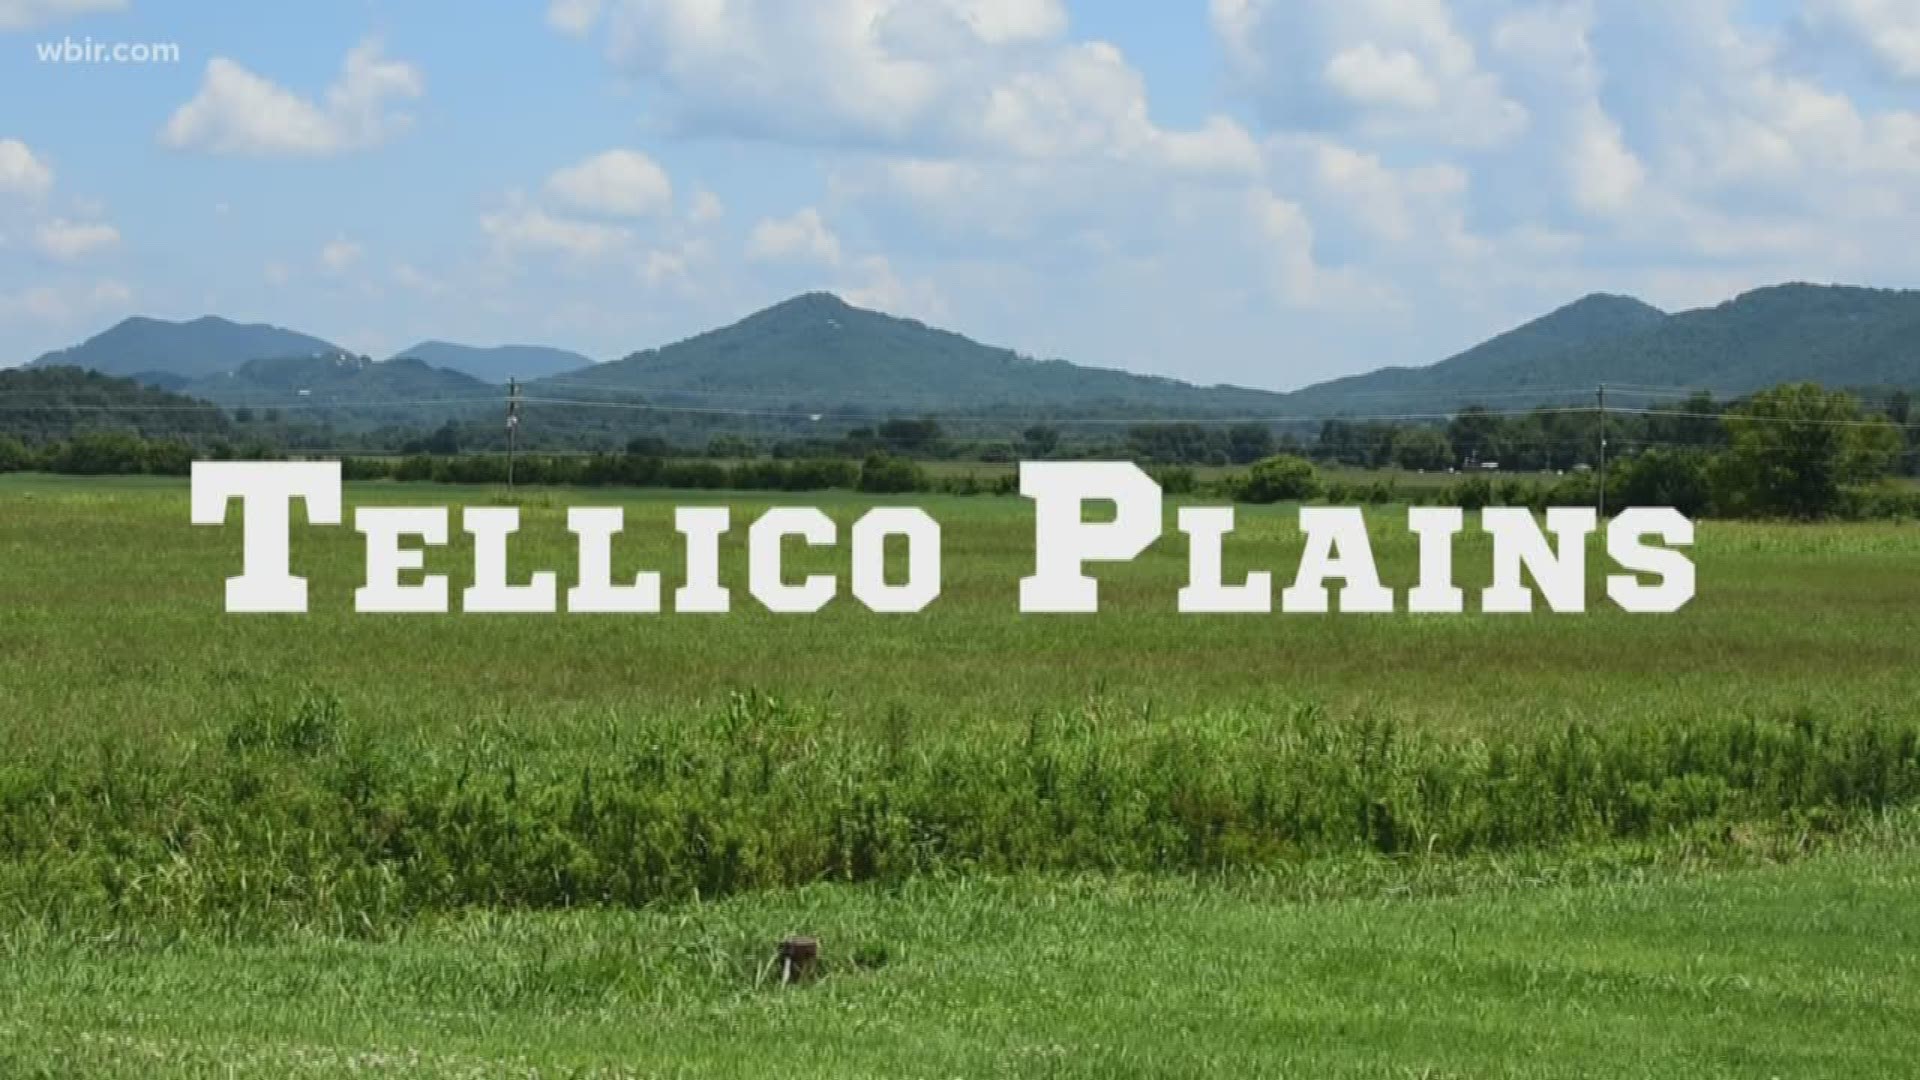 We go inside a Tellico Plains Bears football practice to show you a team playing for its small town community and its coach, who has lung cancer.